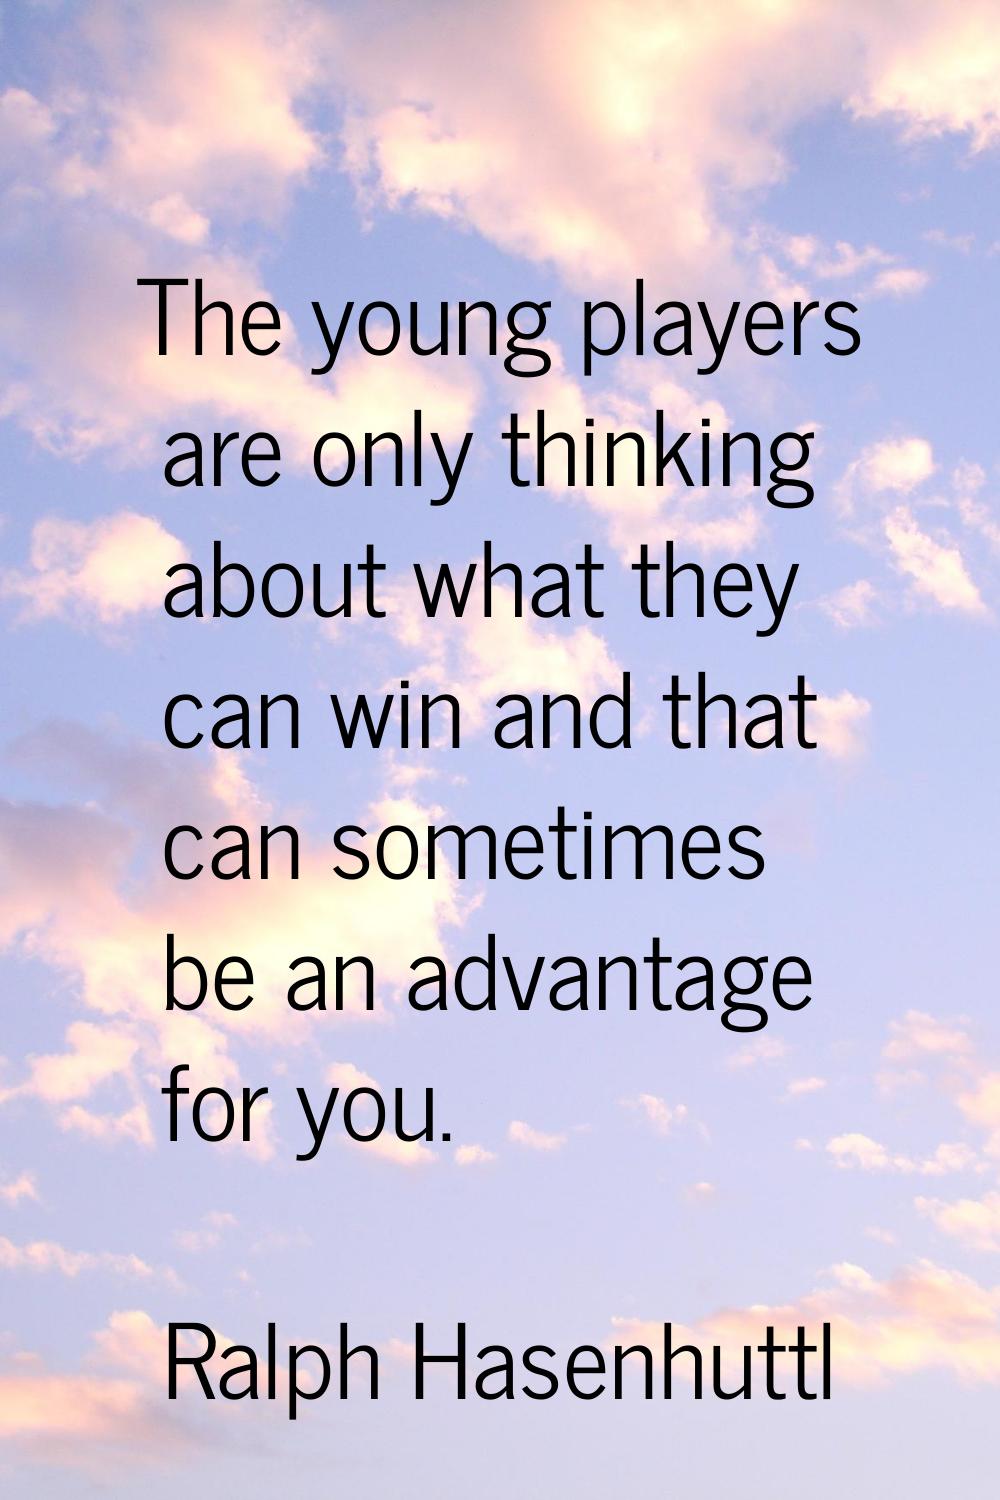 The young players are only thinking about what they can win and that can sometimes be an advantage 